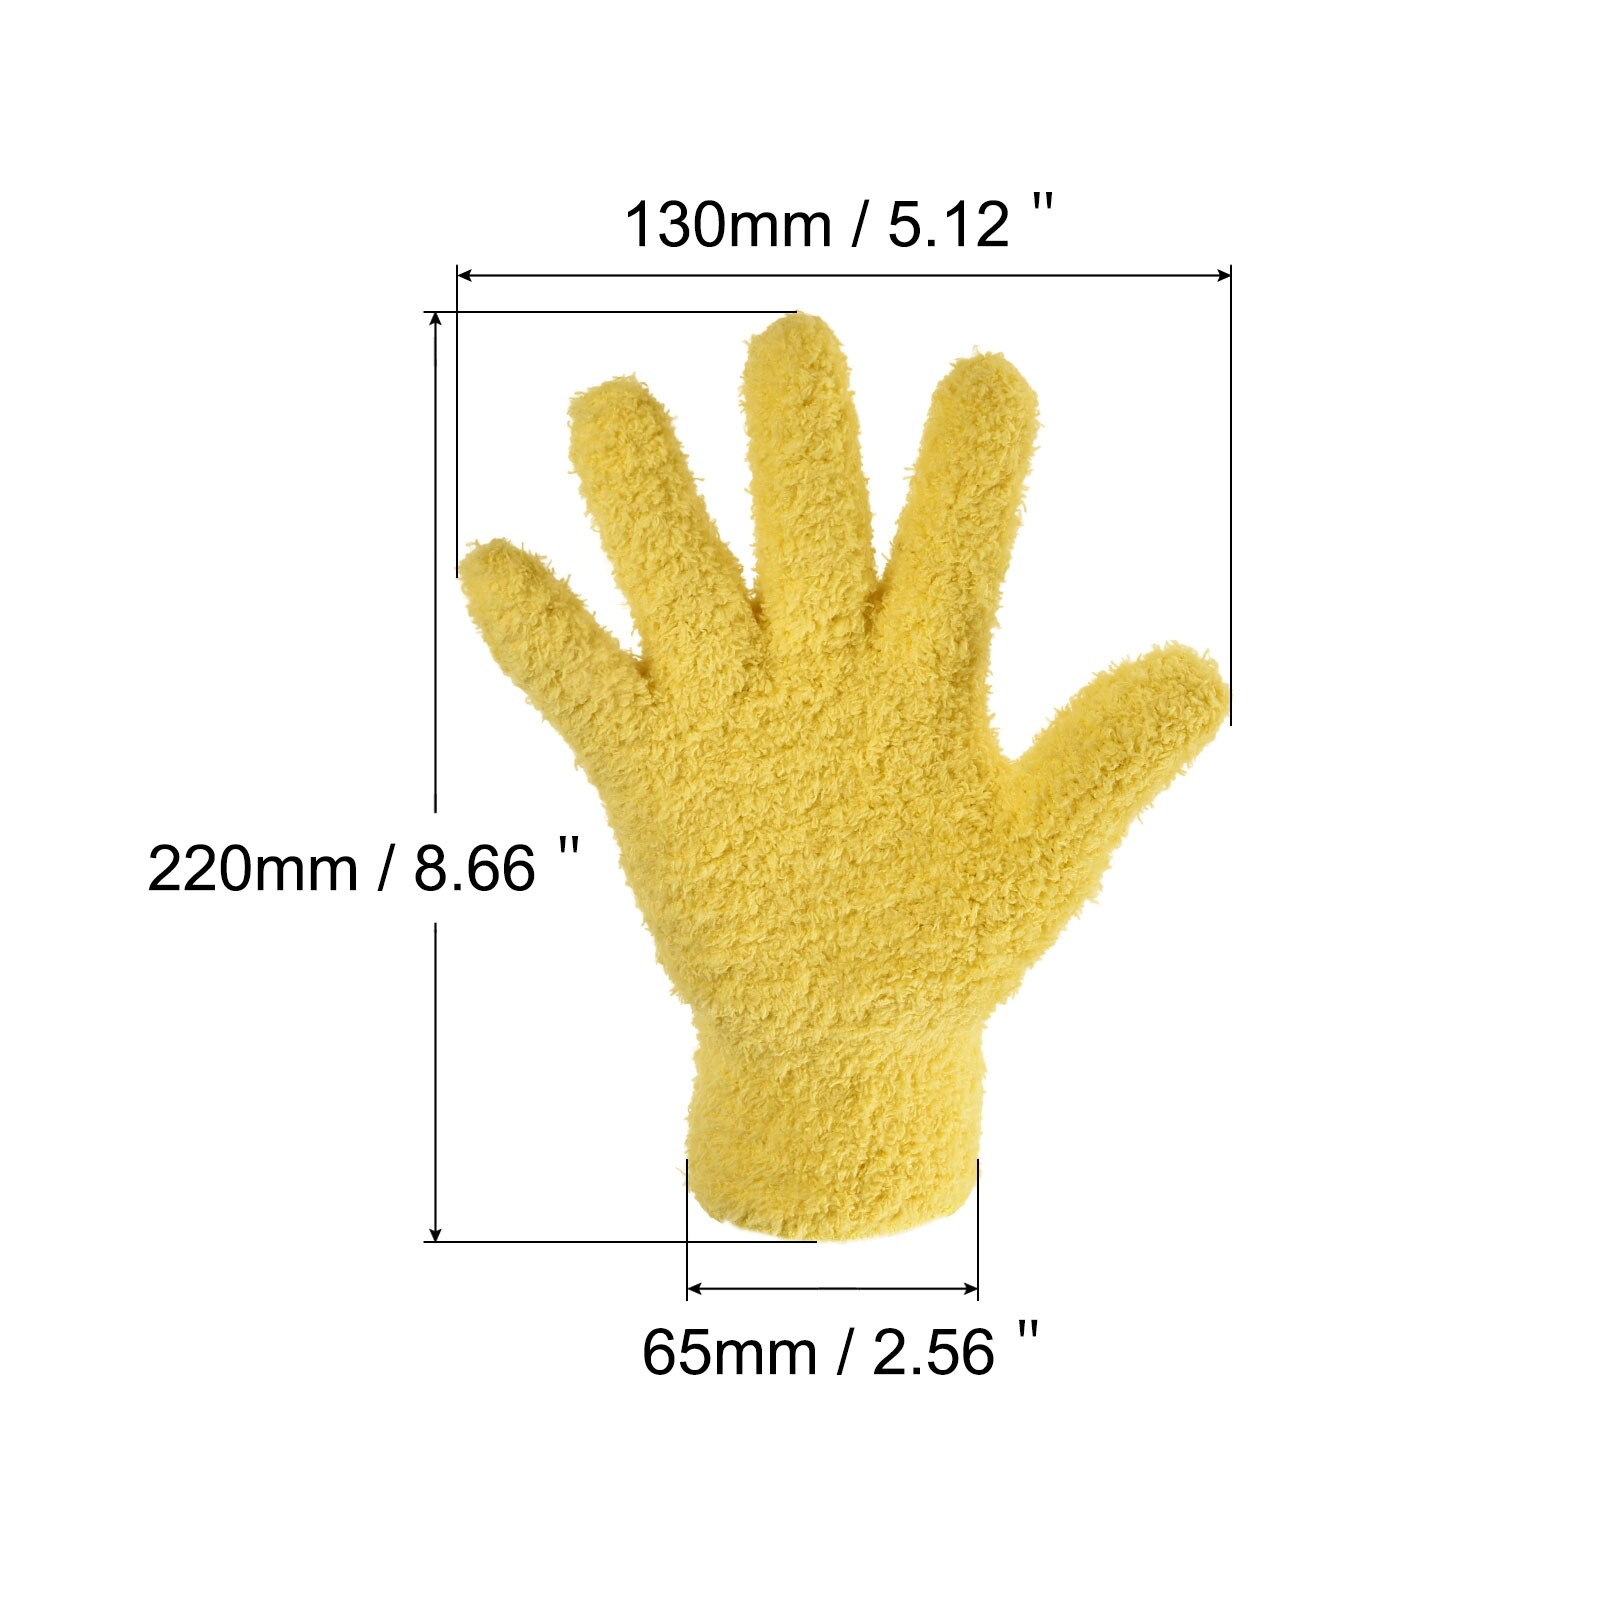 Unique Bargains Dusting Cleaning Gloves Microfiber Mittens for Plant Blinds  Lamp Window Yellow 2 Pair